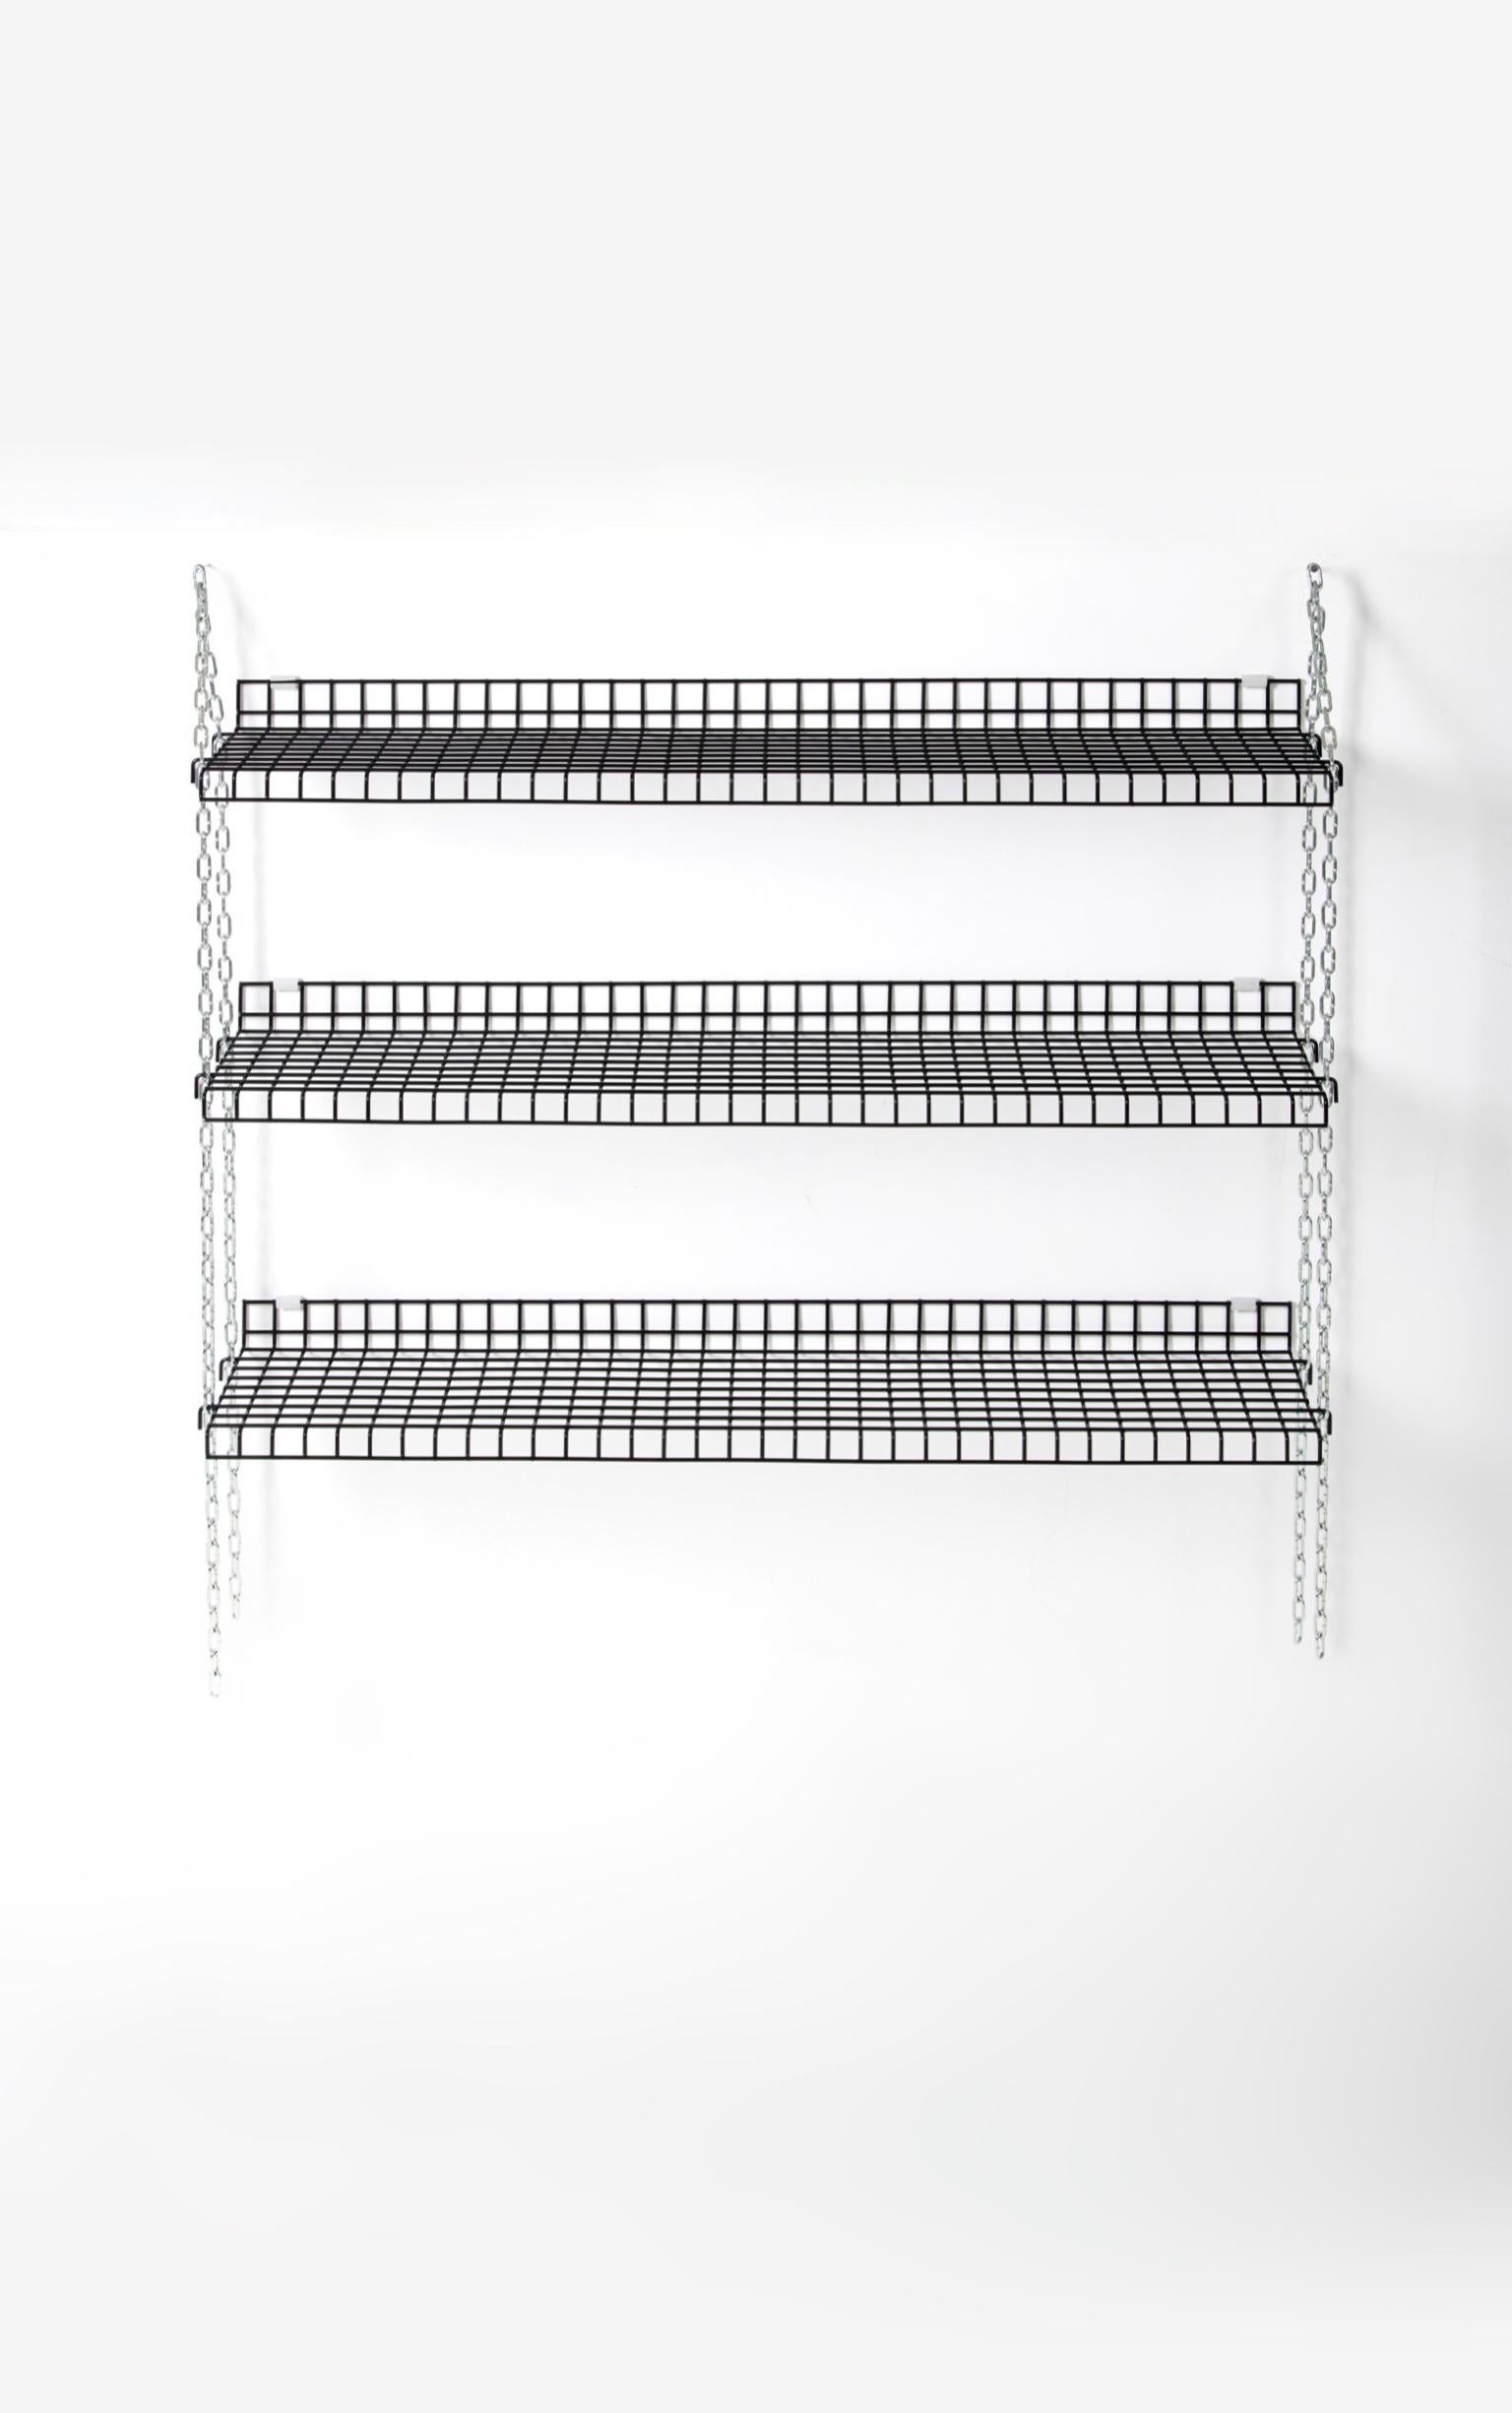 Libreria model shelves designed by Bruno Munari and published by Robots in the 1970s, Milan (Italy). Black metal shelves suspended by metal chains. Perfect condition, original instructions, and packaging. Two available.
LP1043-1044